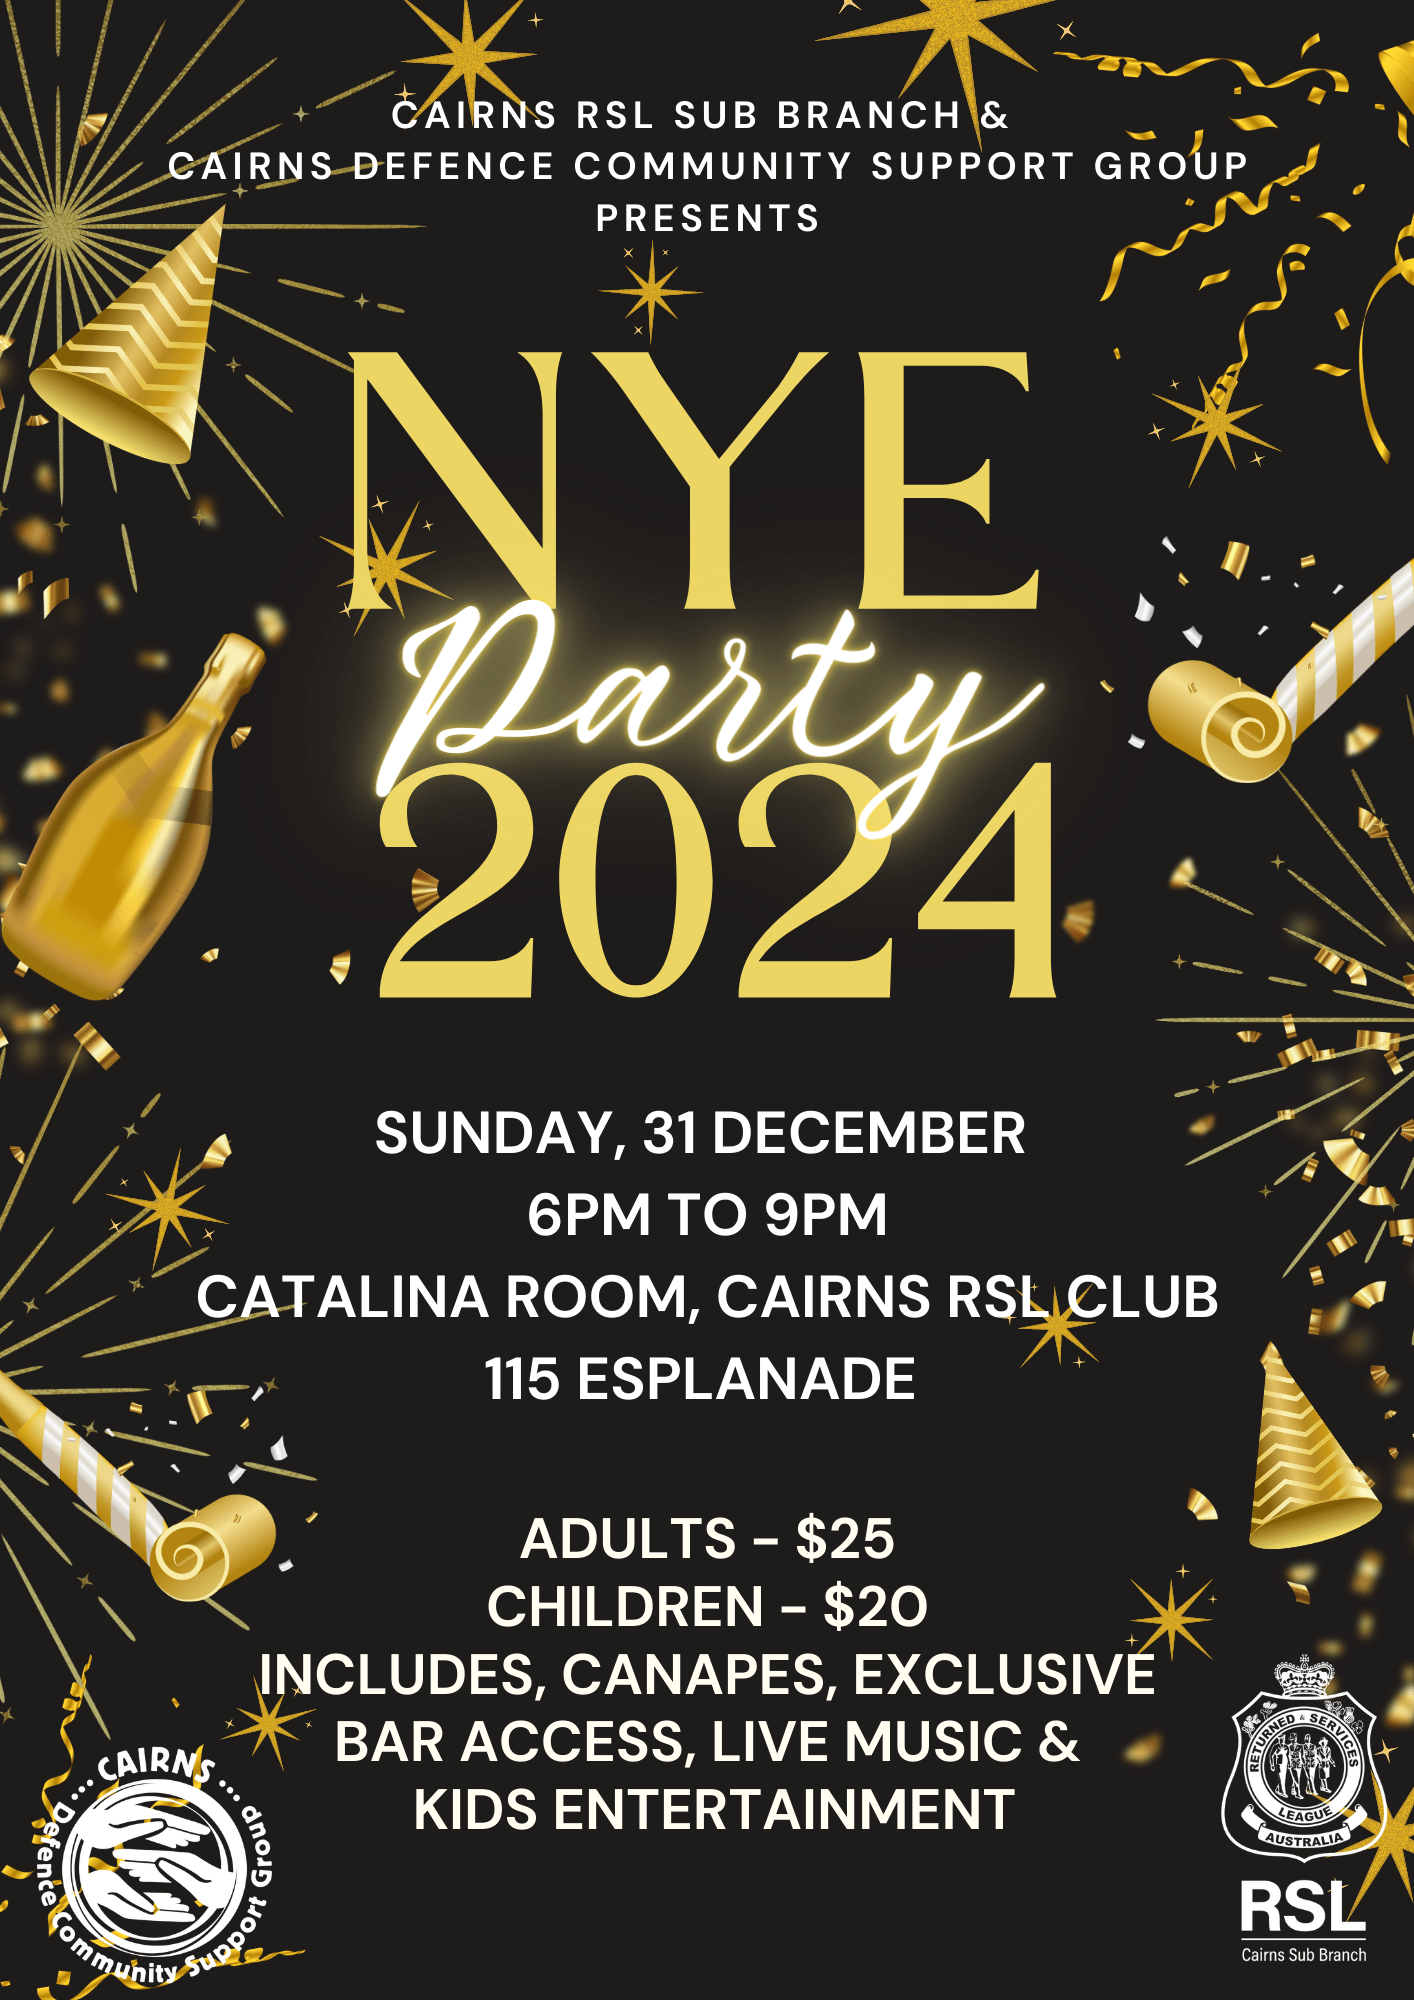 New Years Eve Party 2024 - Cairns RSL SubBranch